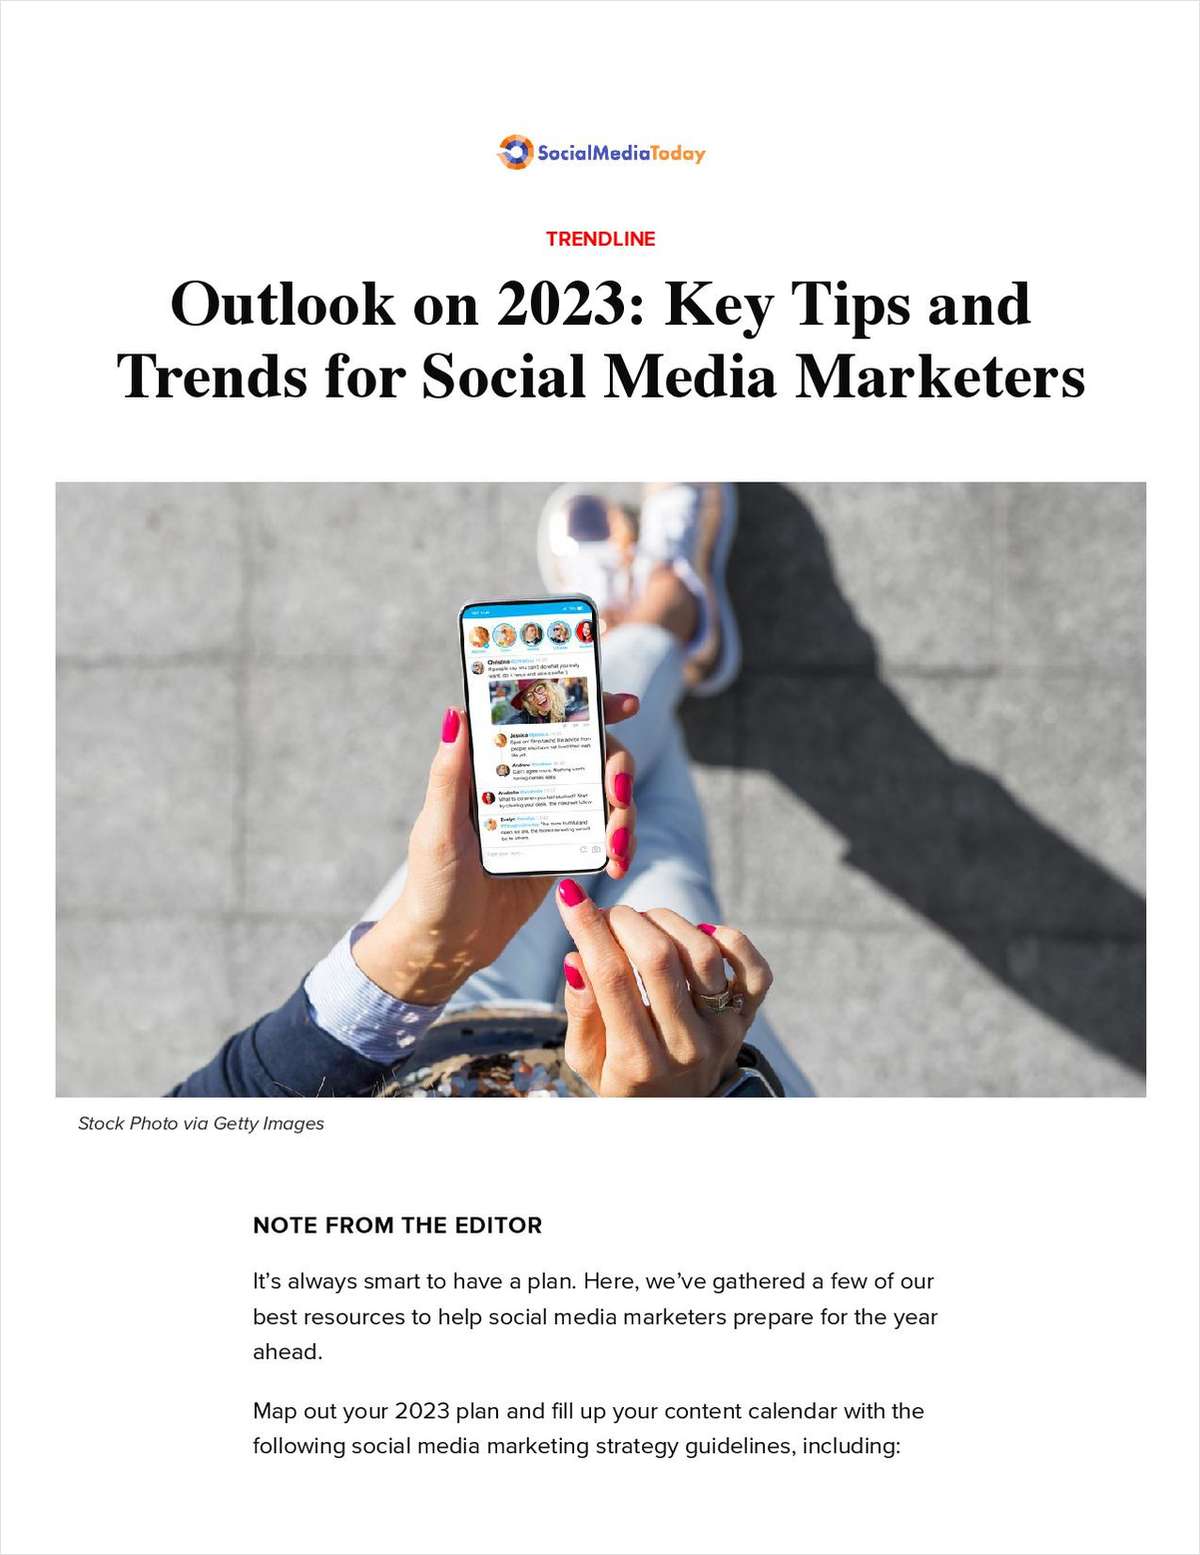 Outlook on 2023: Key Tips and Trends for Social Media Marketers